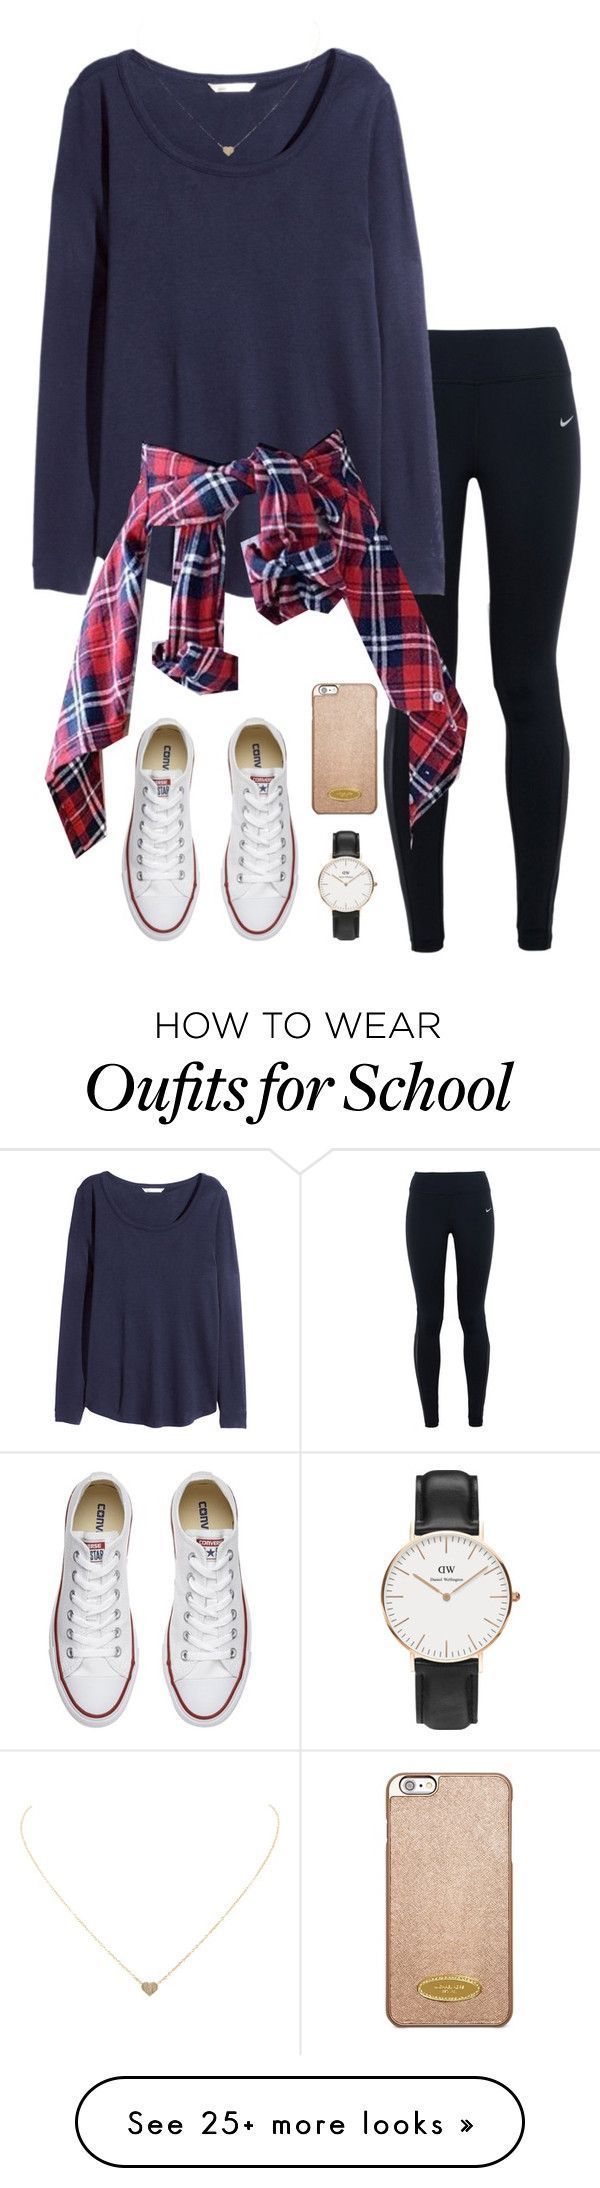 I couldn't do the leggings but maybe black jeans- “School today” by ksarak o…